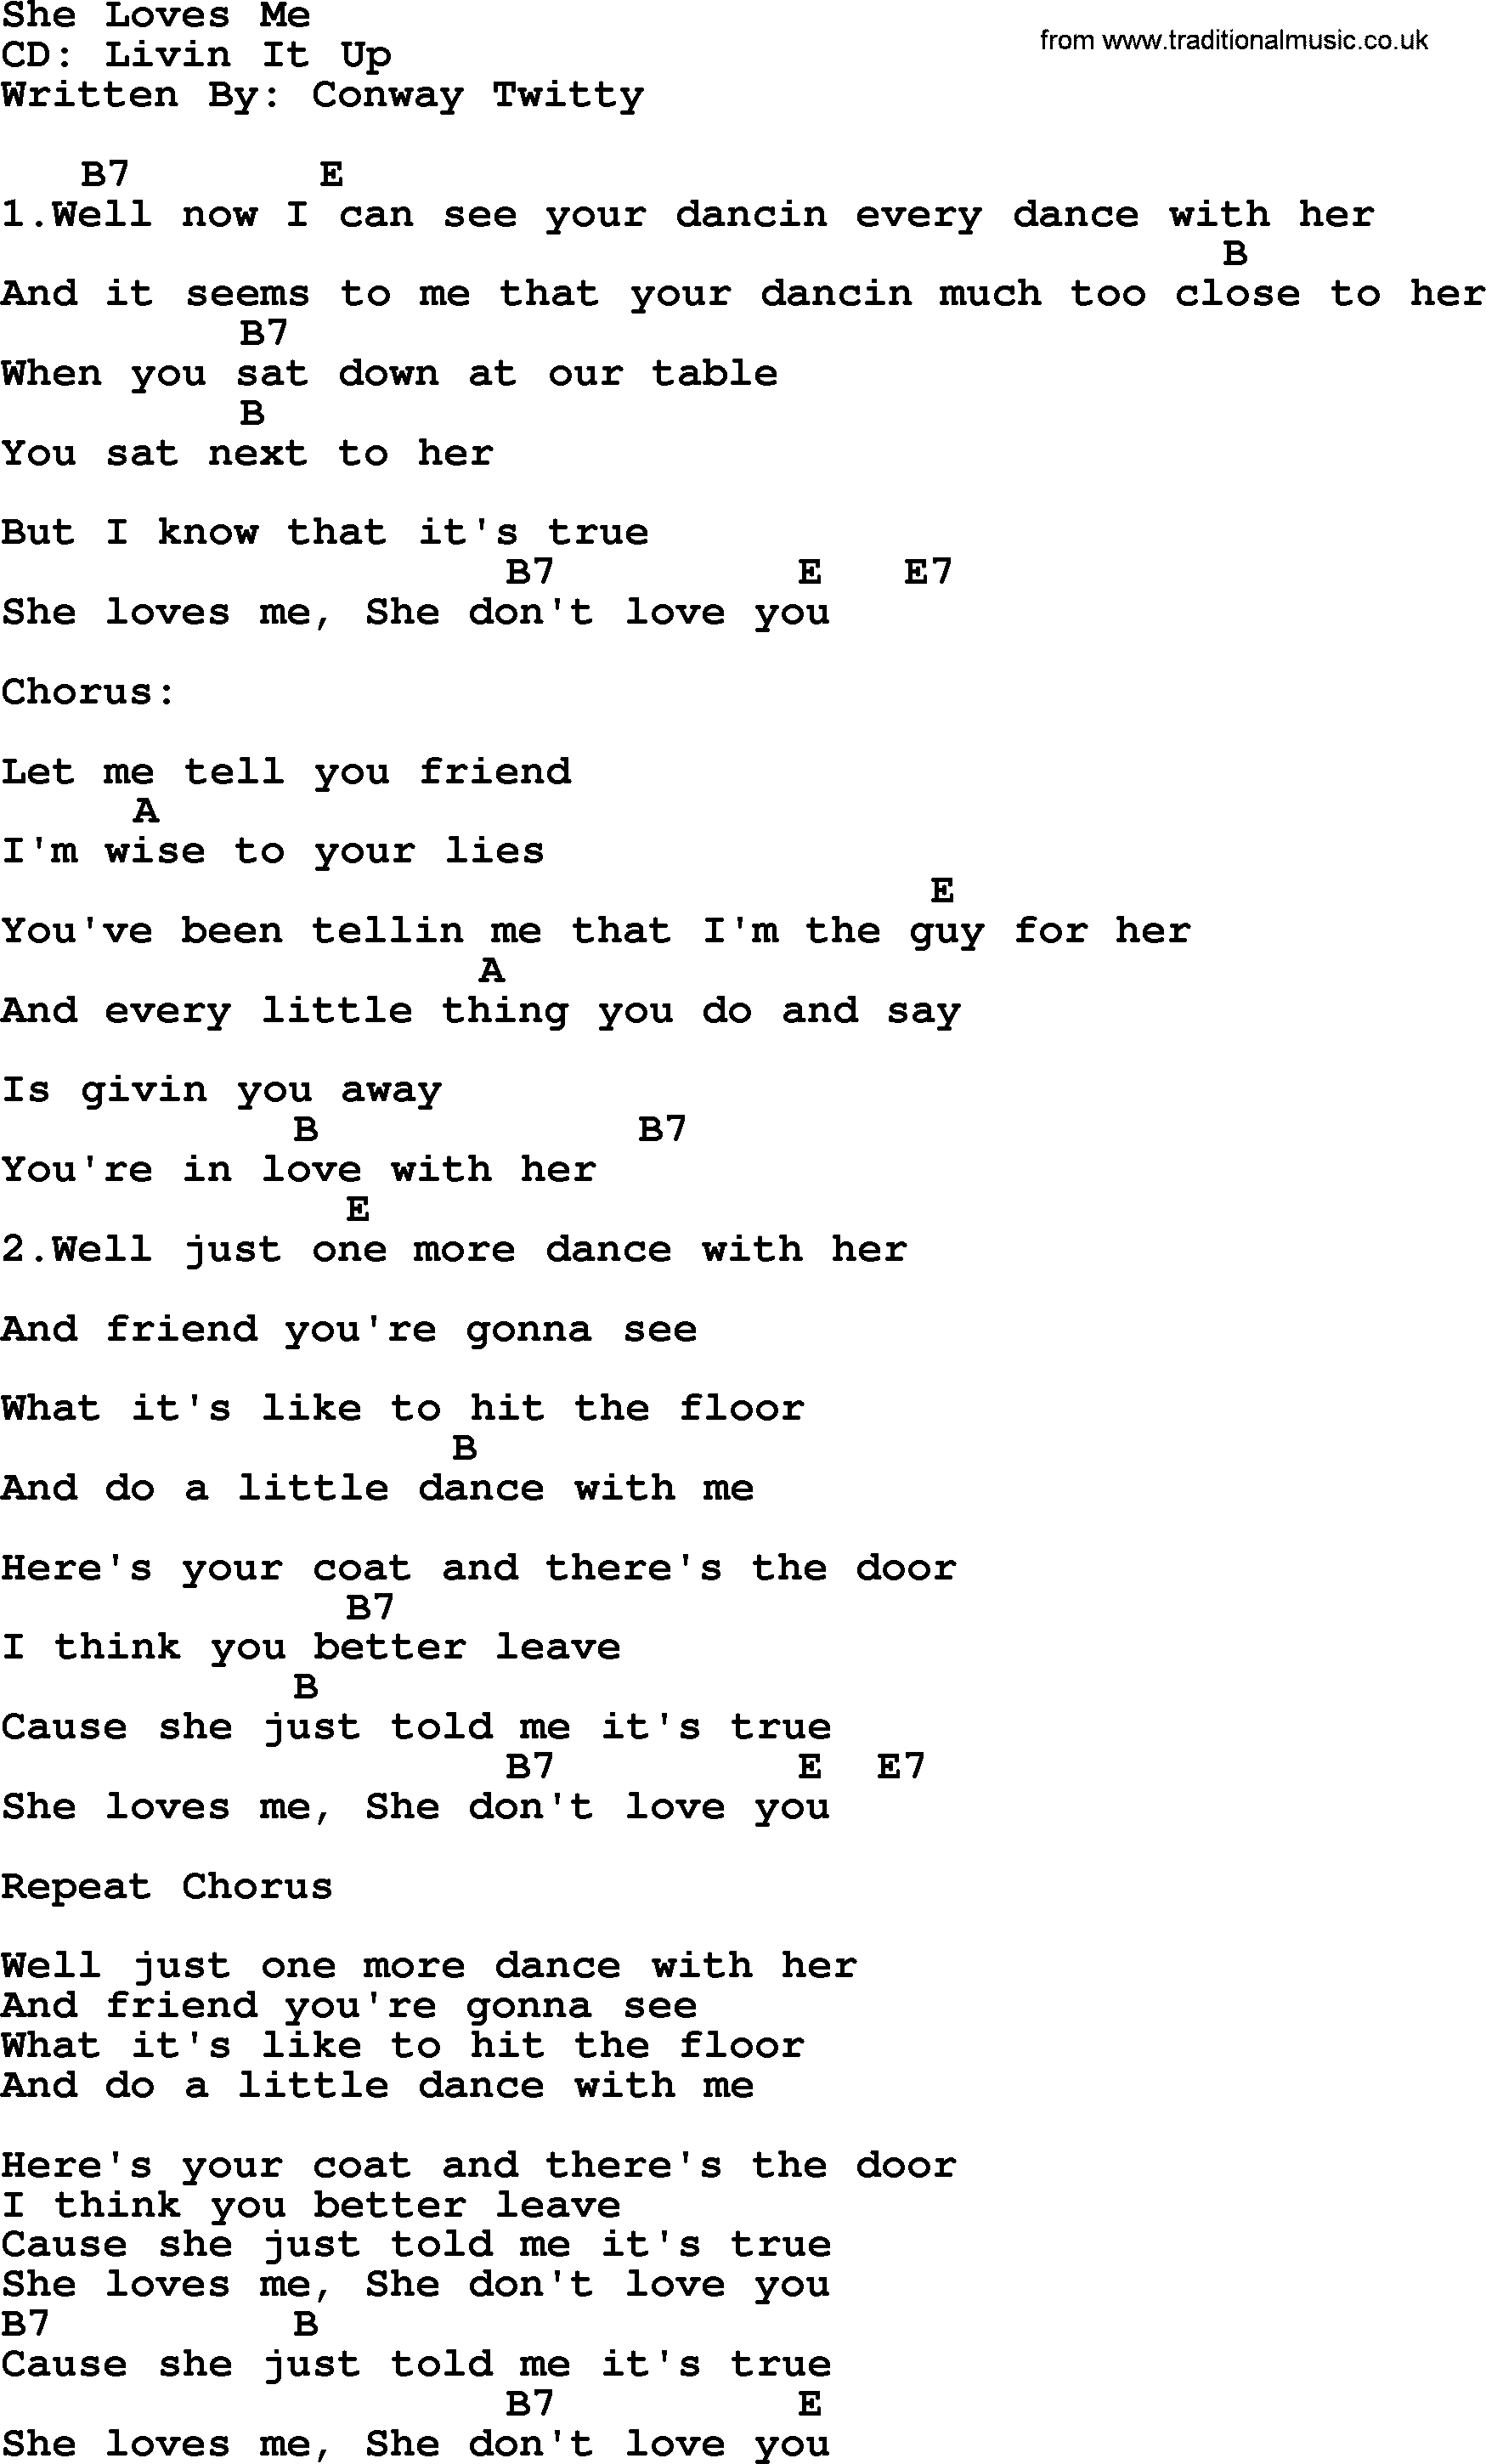 George Strait song: She Loves Me, lyrics and chords